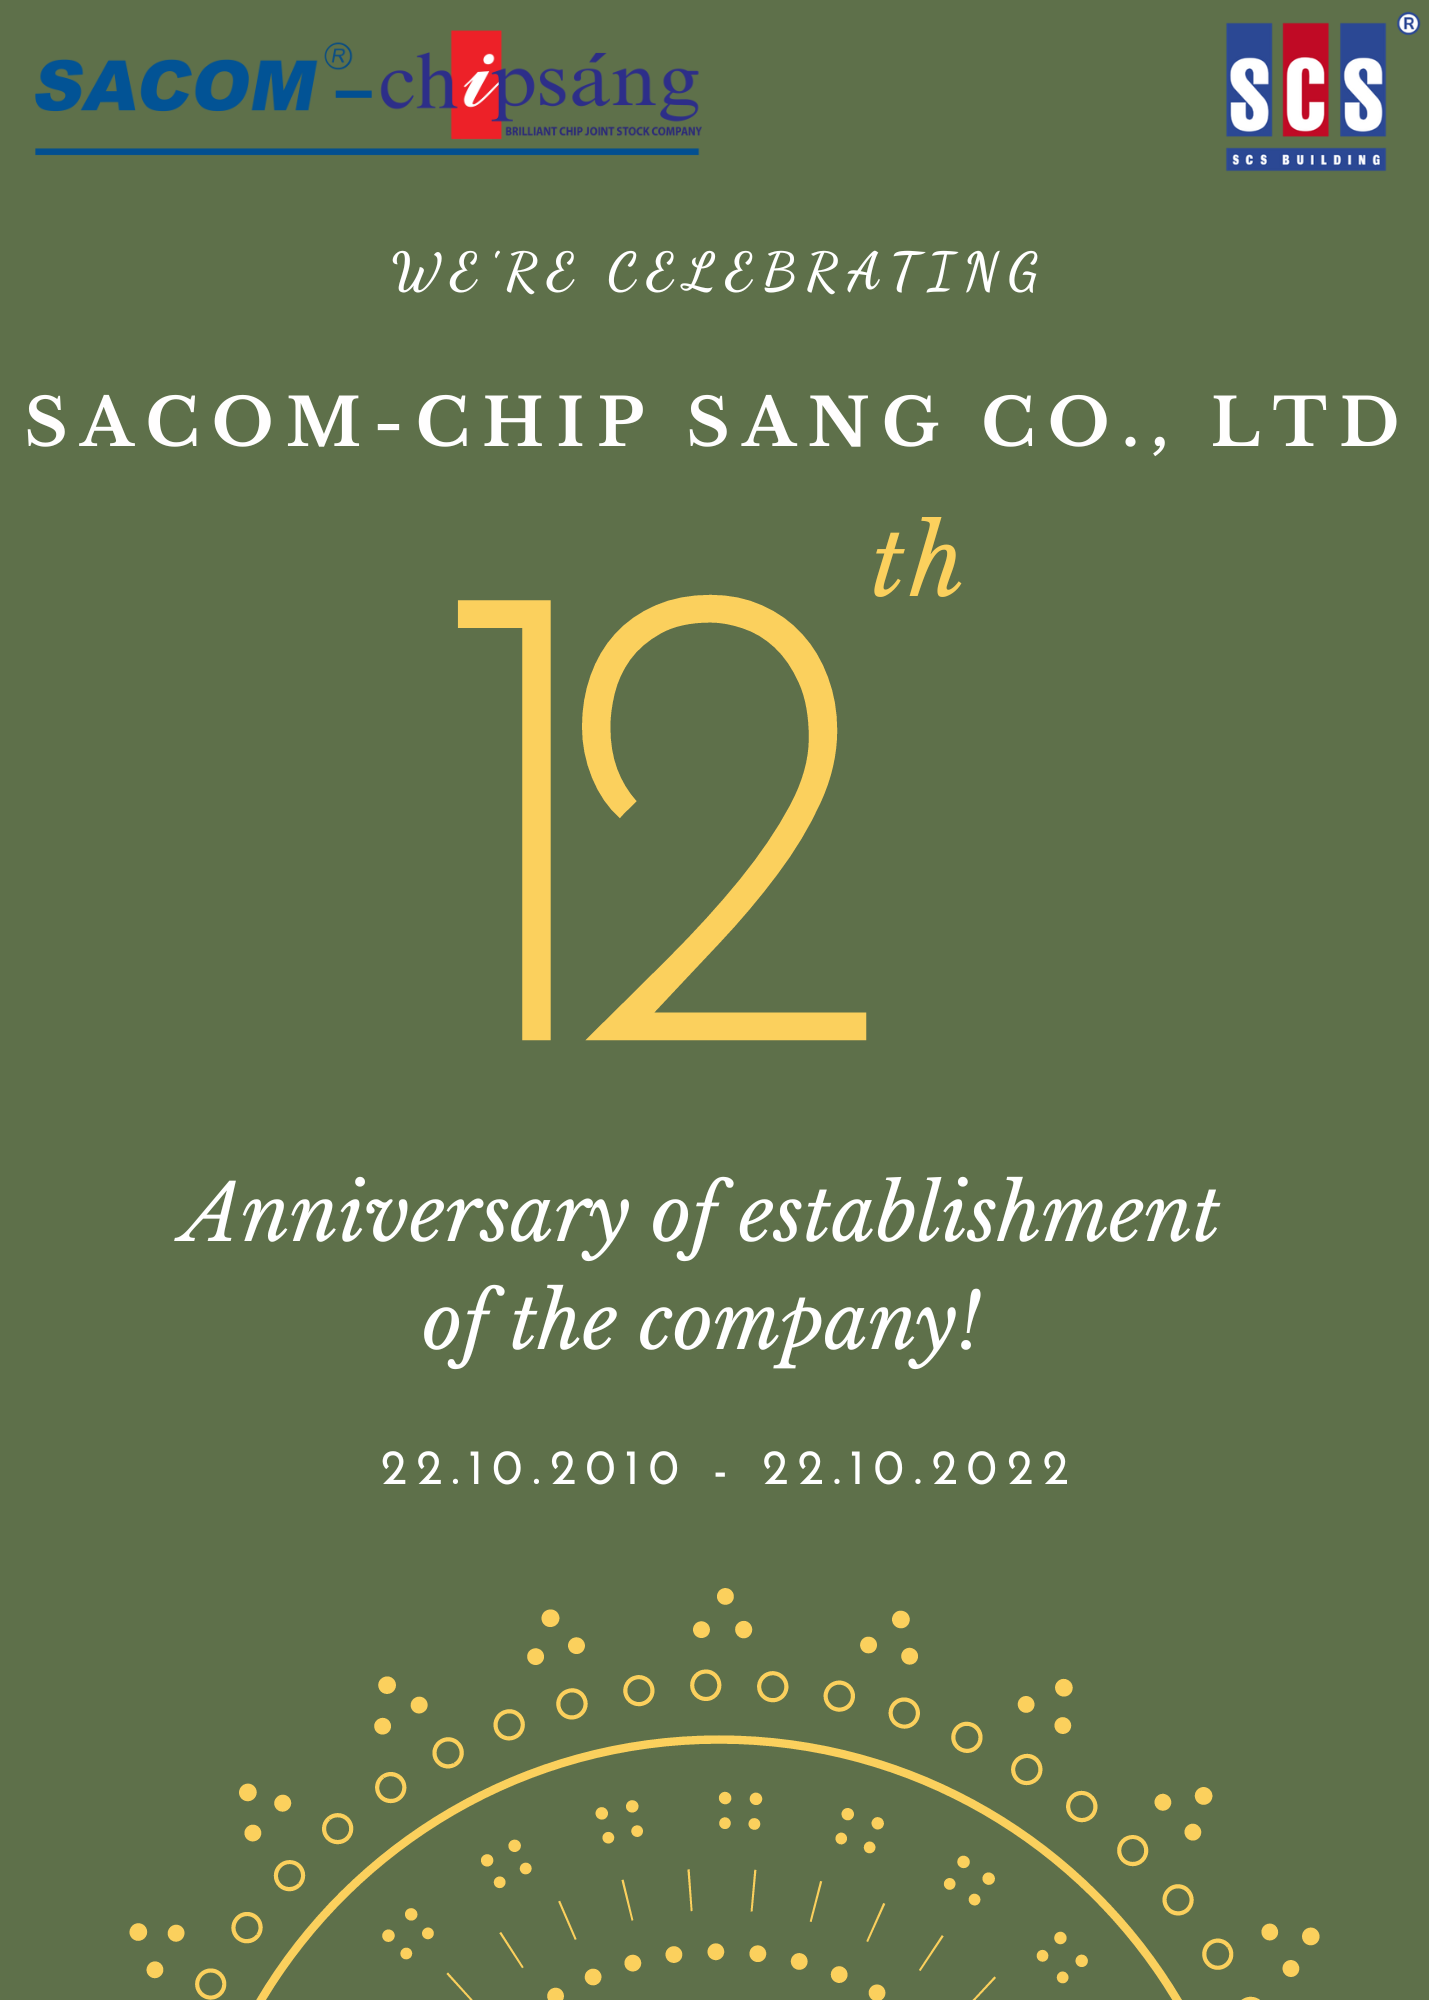 Congratulations on the 12th Anniversary of Sacom - Chip Sang Co., Ltd (October 22nd, 2010 - October 22nd, 2022)